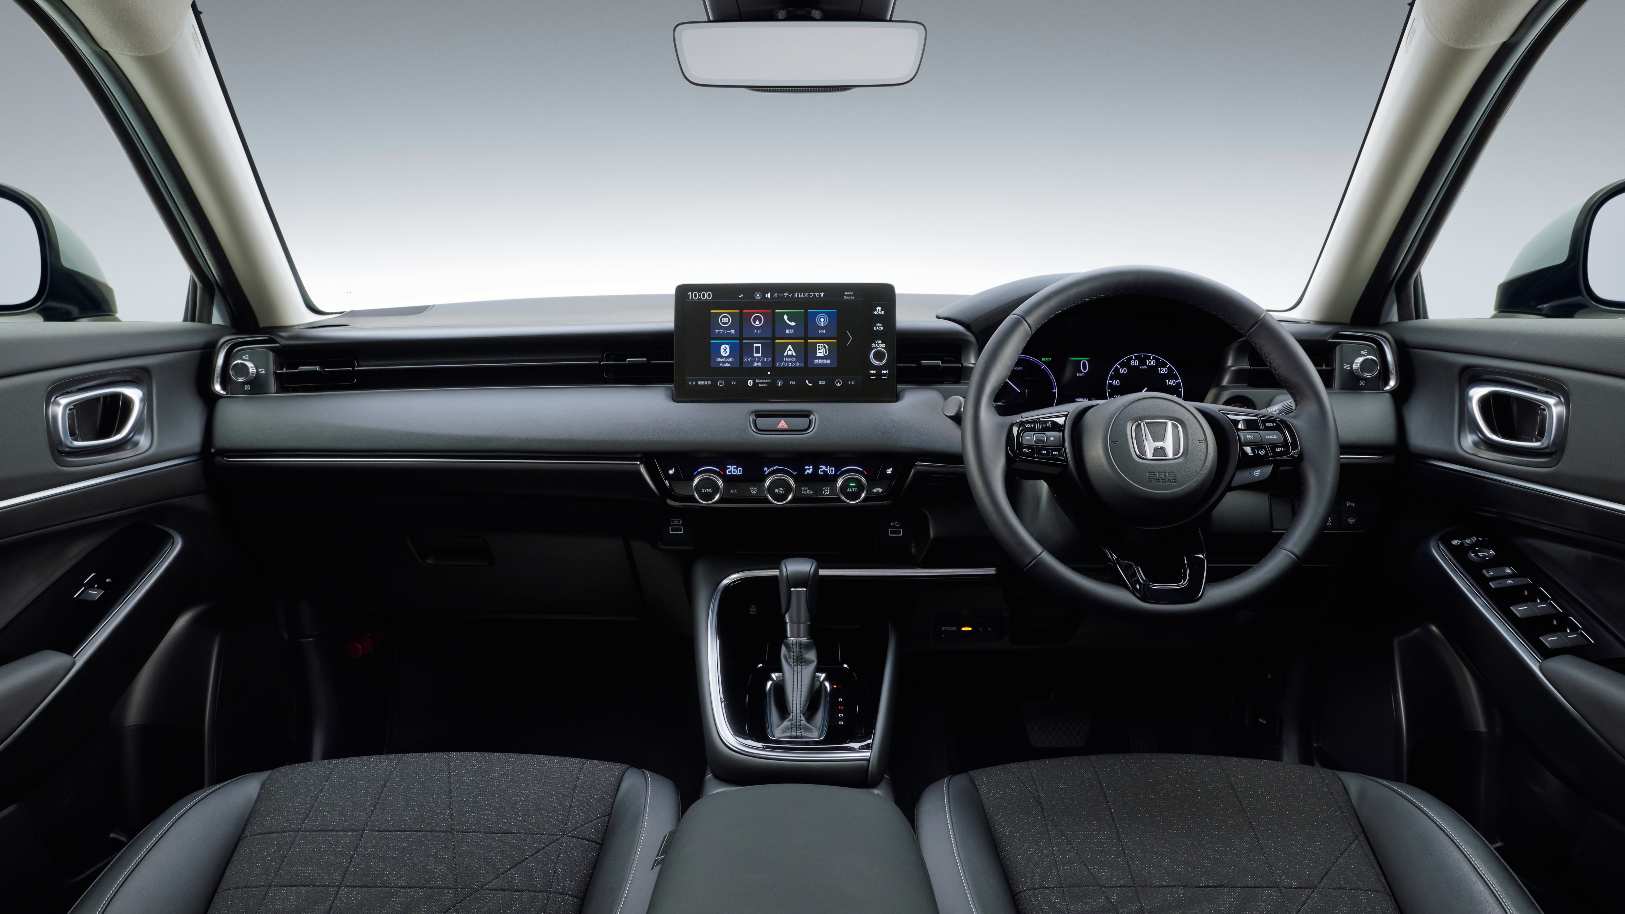 Floating 8.0-inch touchscreen takes centre stage on the new Honda HR-V's dashboard. Image: Honda